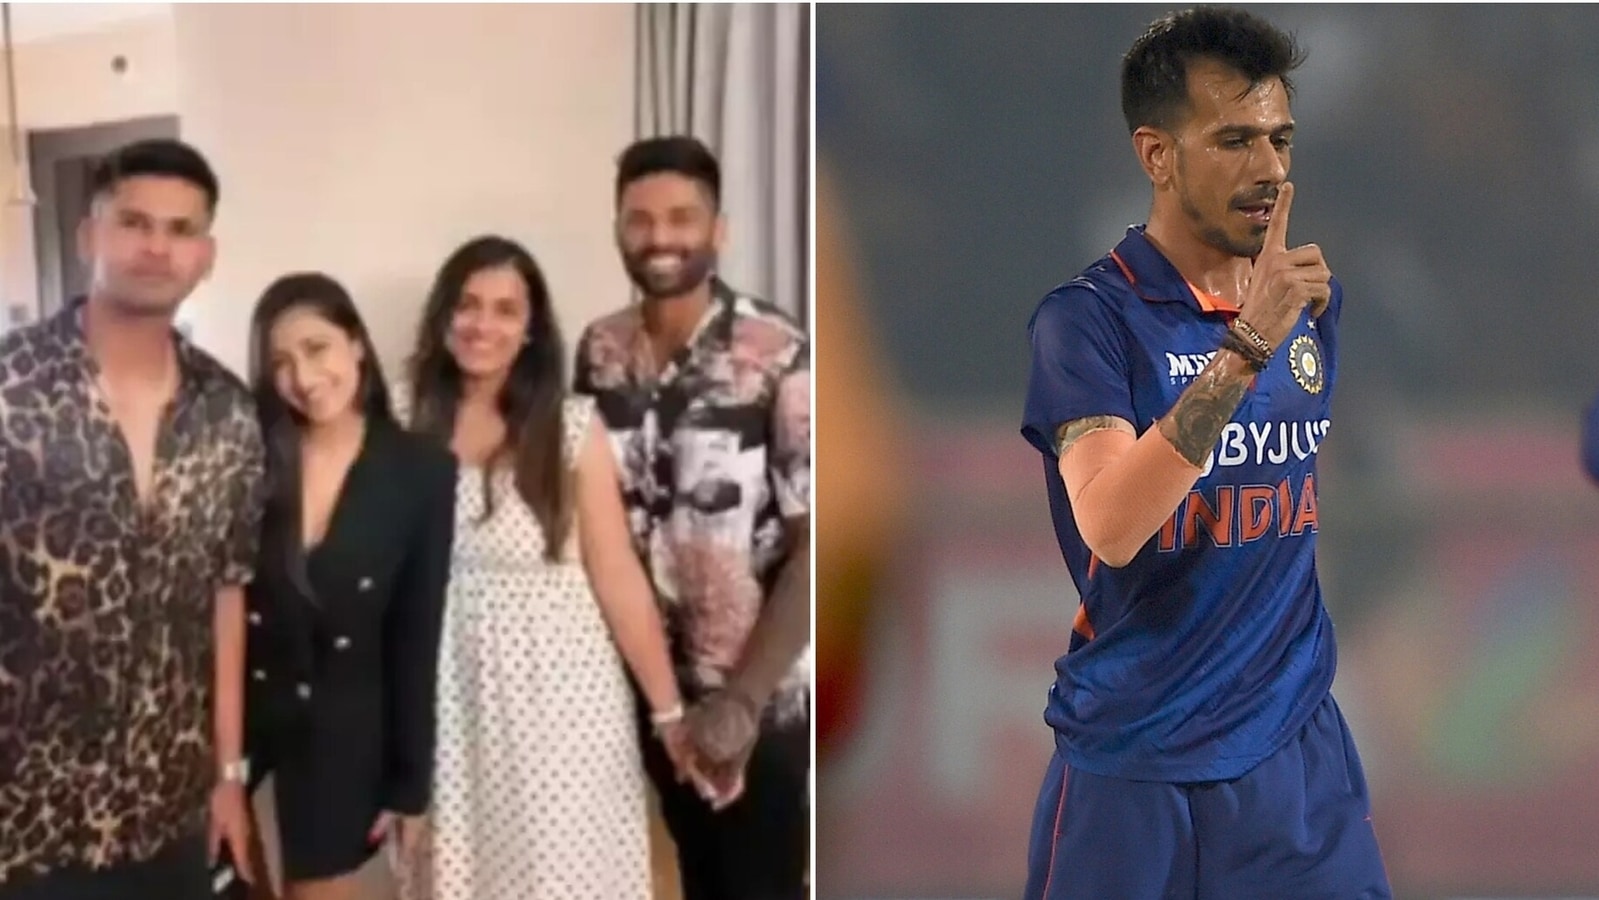 Yuzvendra Chahal Gives A Fitting Reply To His Troll